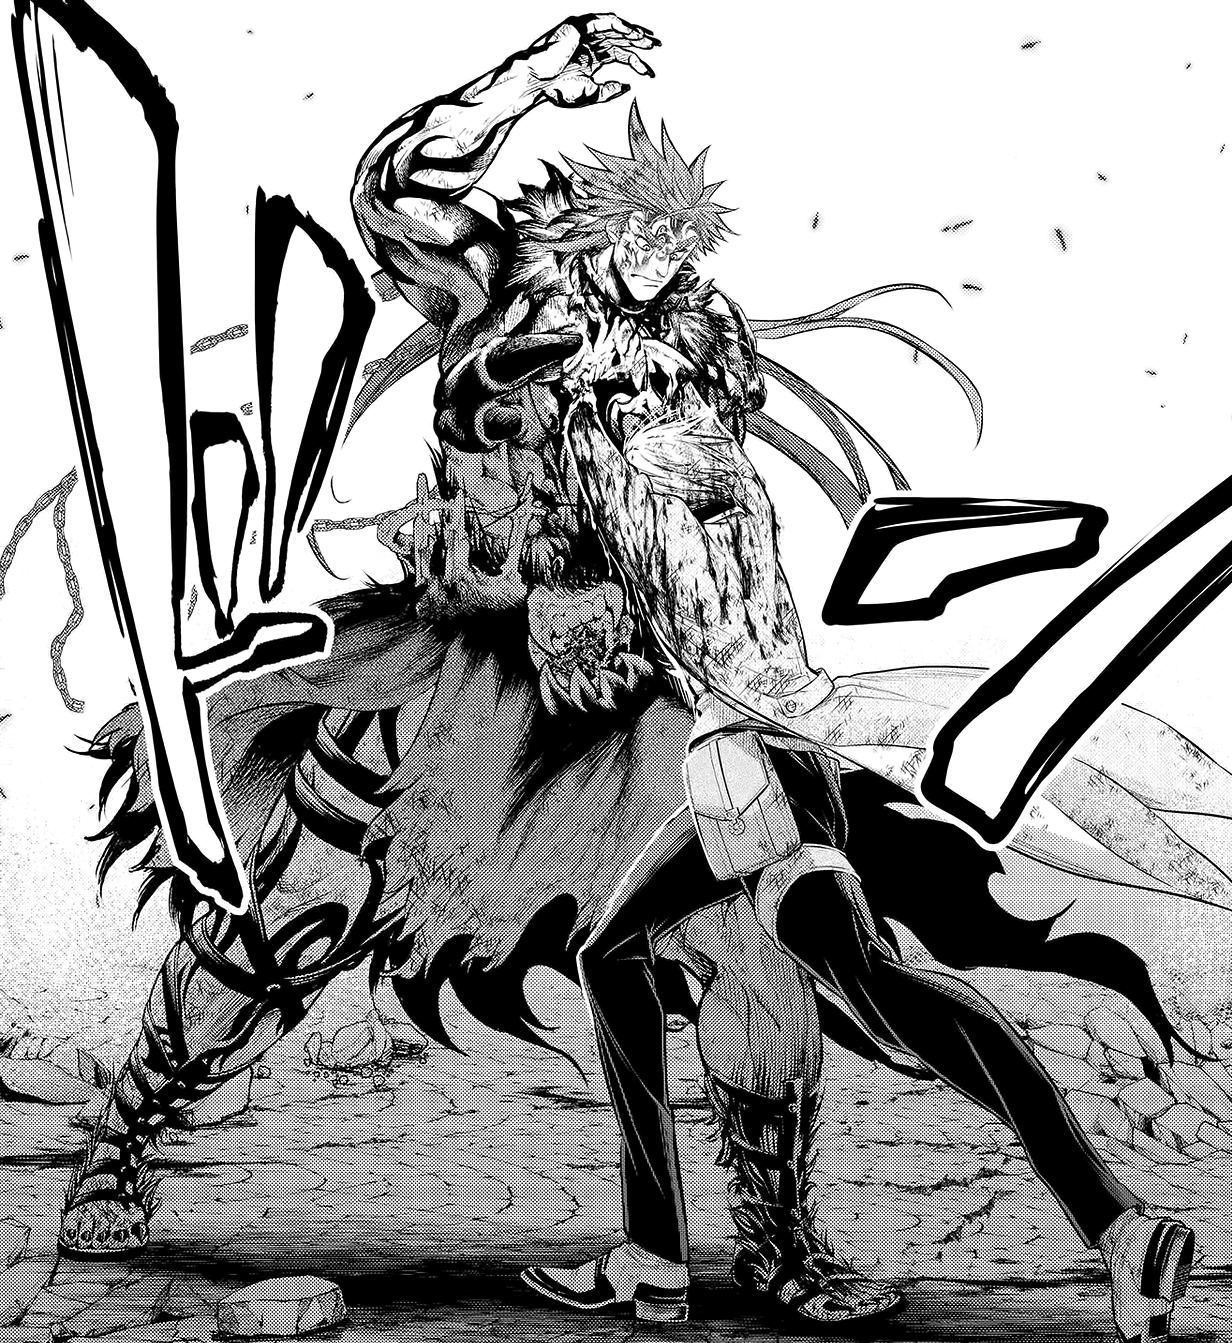 Spoilers for chapter 82 of Record of Ragnarok The Sun God's counter-at